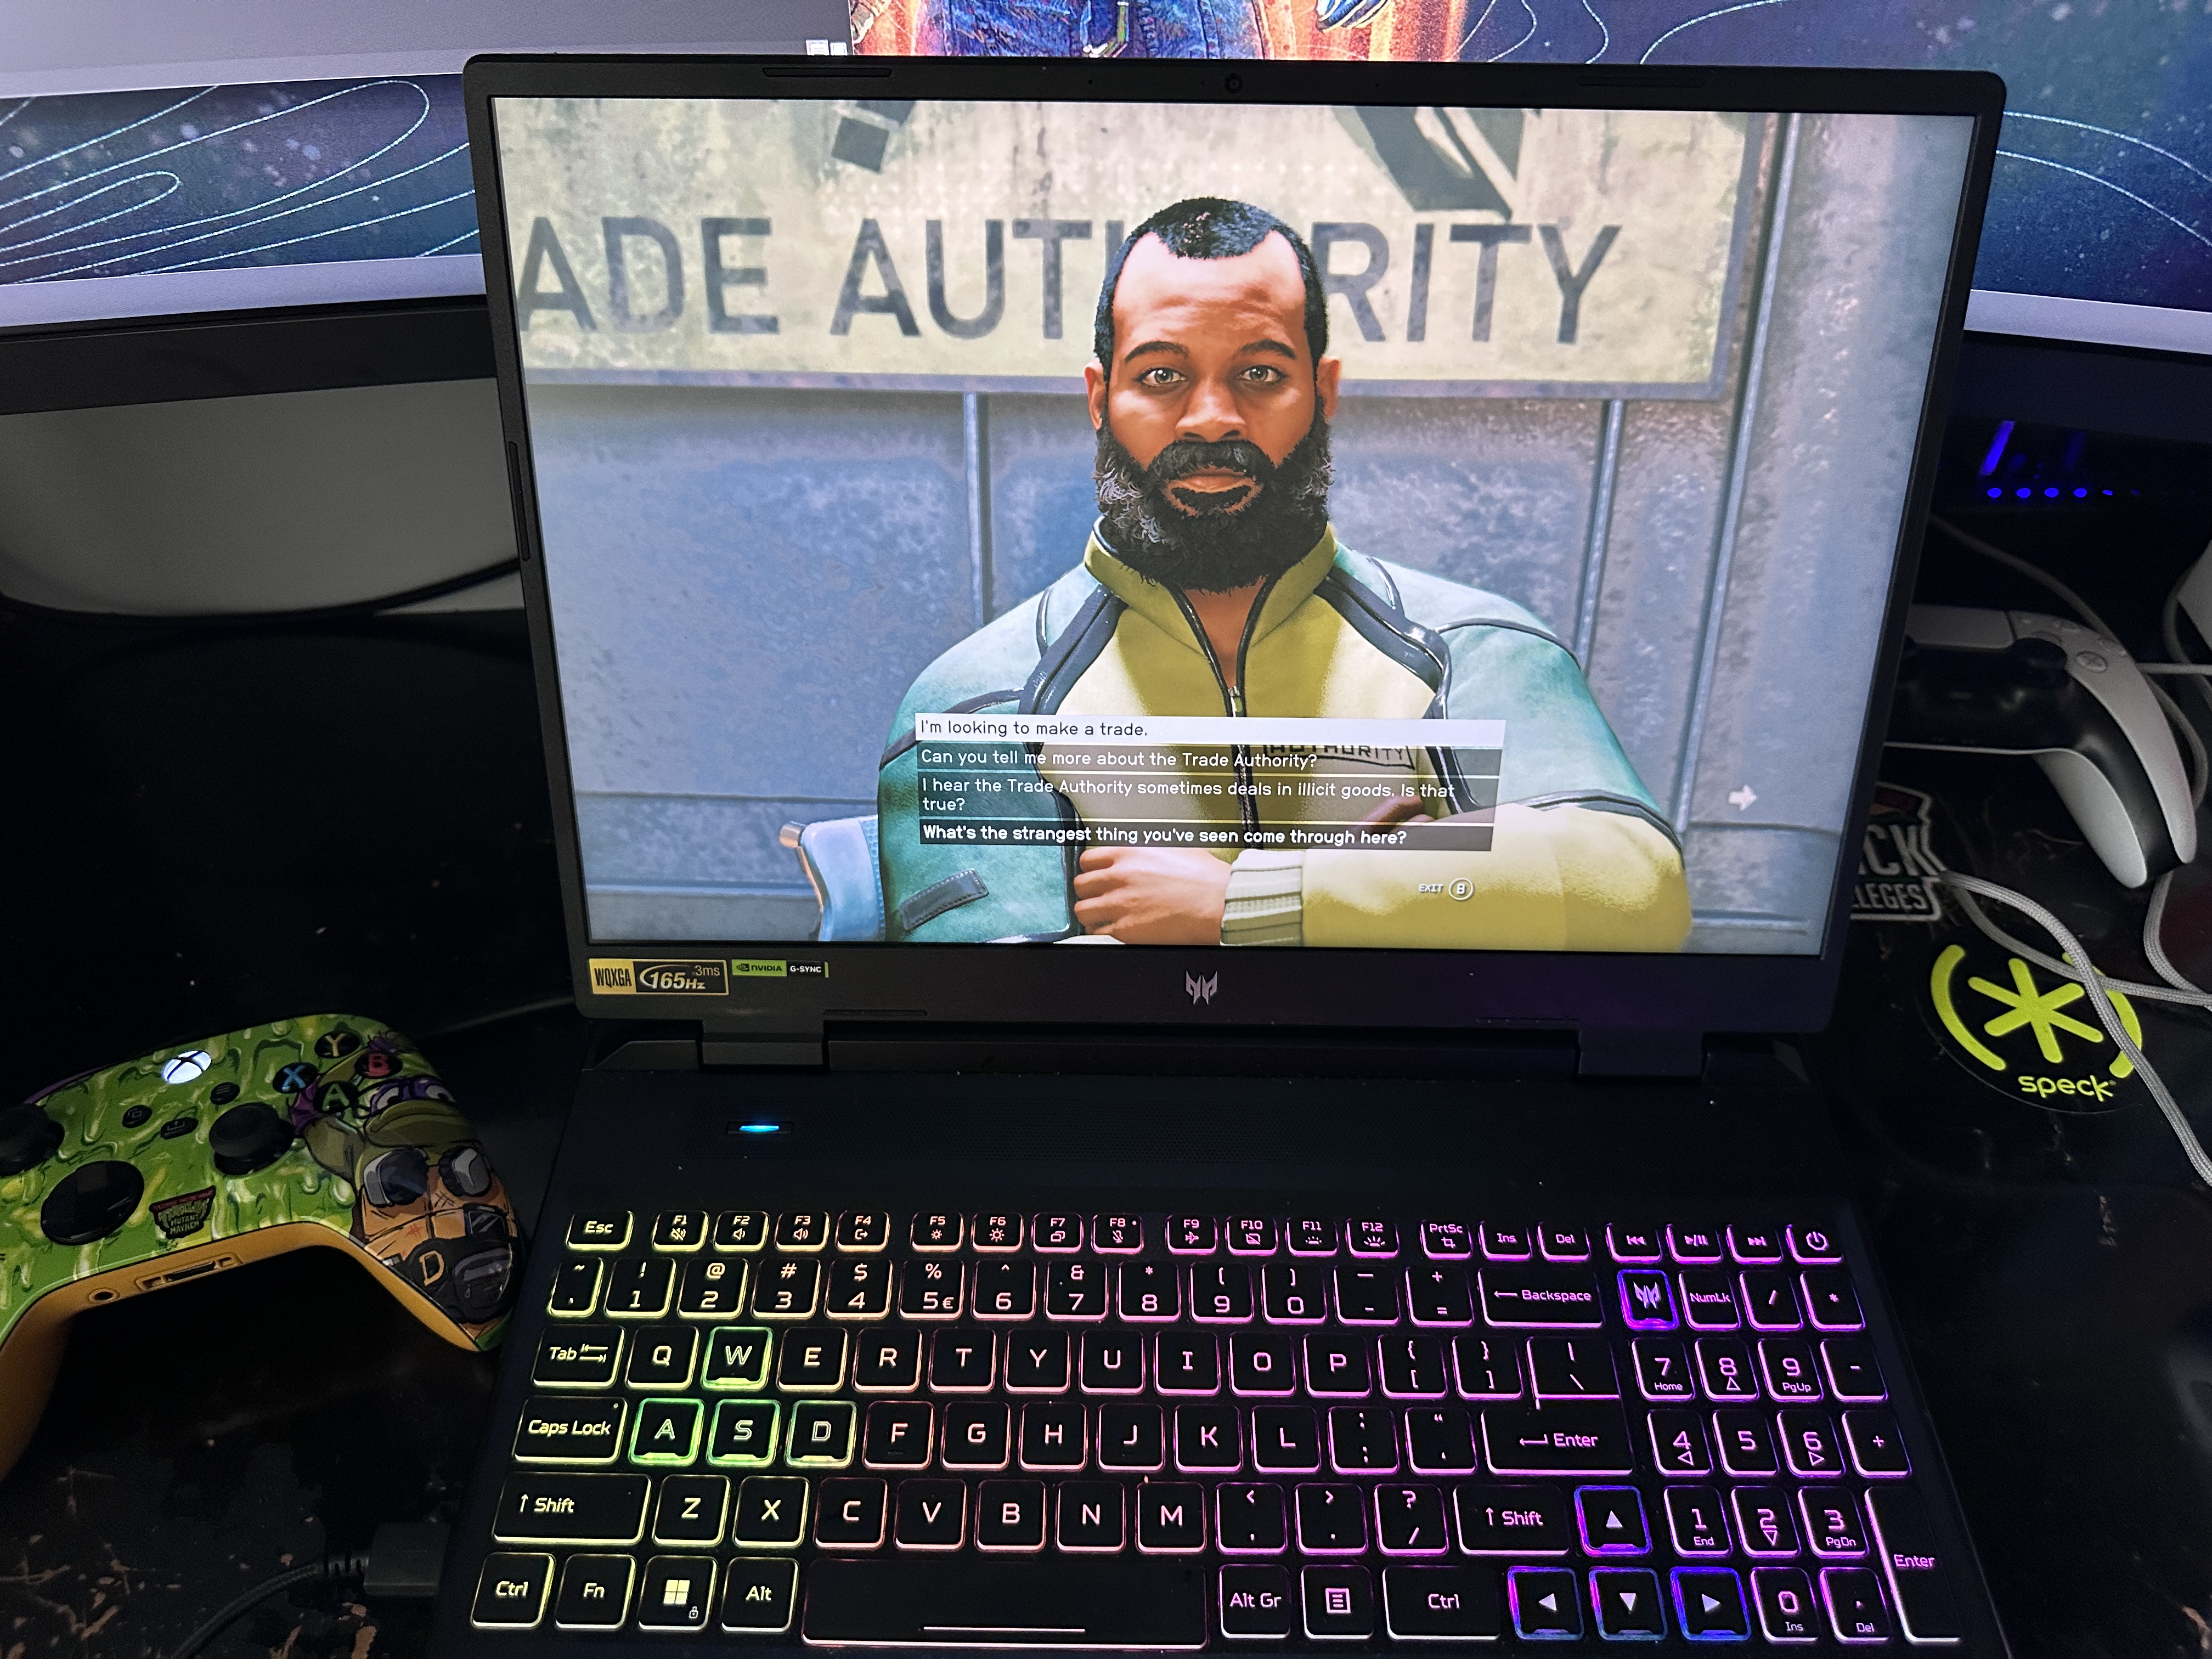 Acer Predator Helios Neo 16 Review: Solid Performance, Short